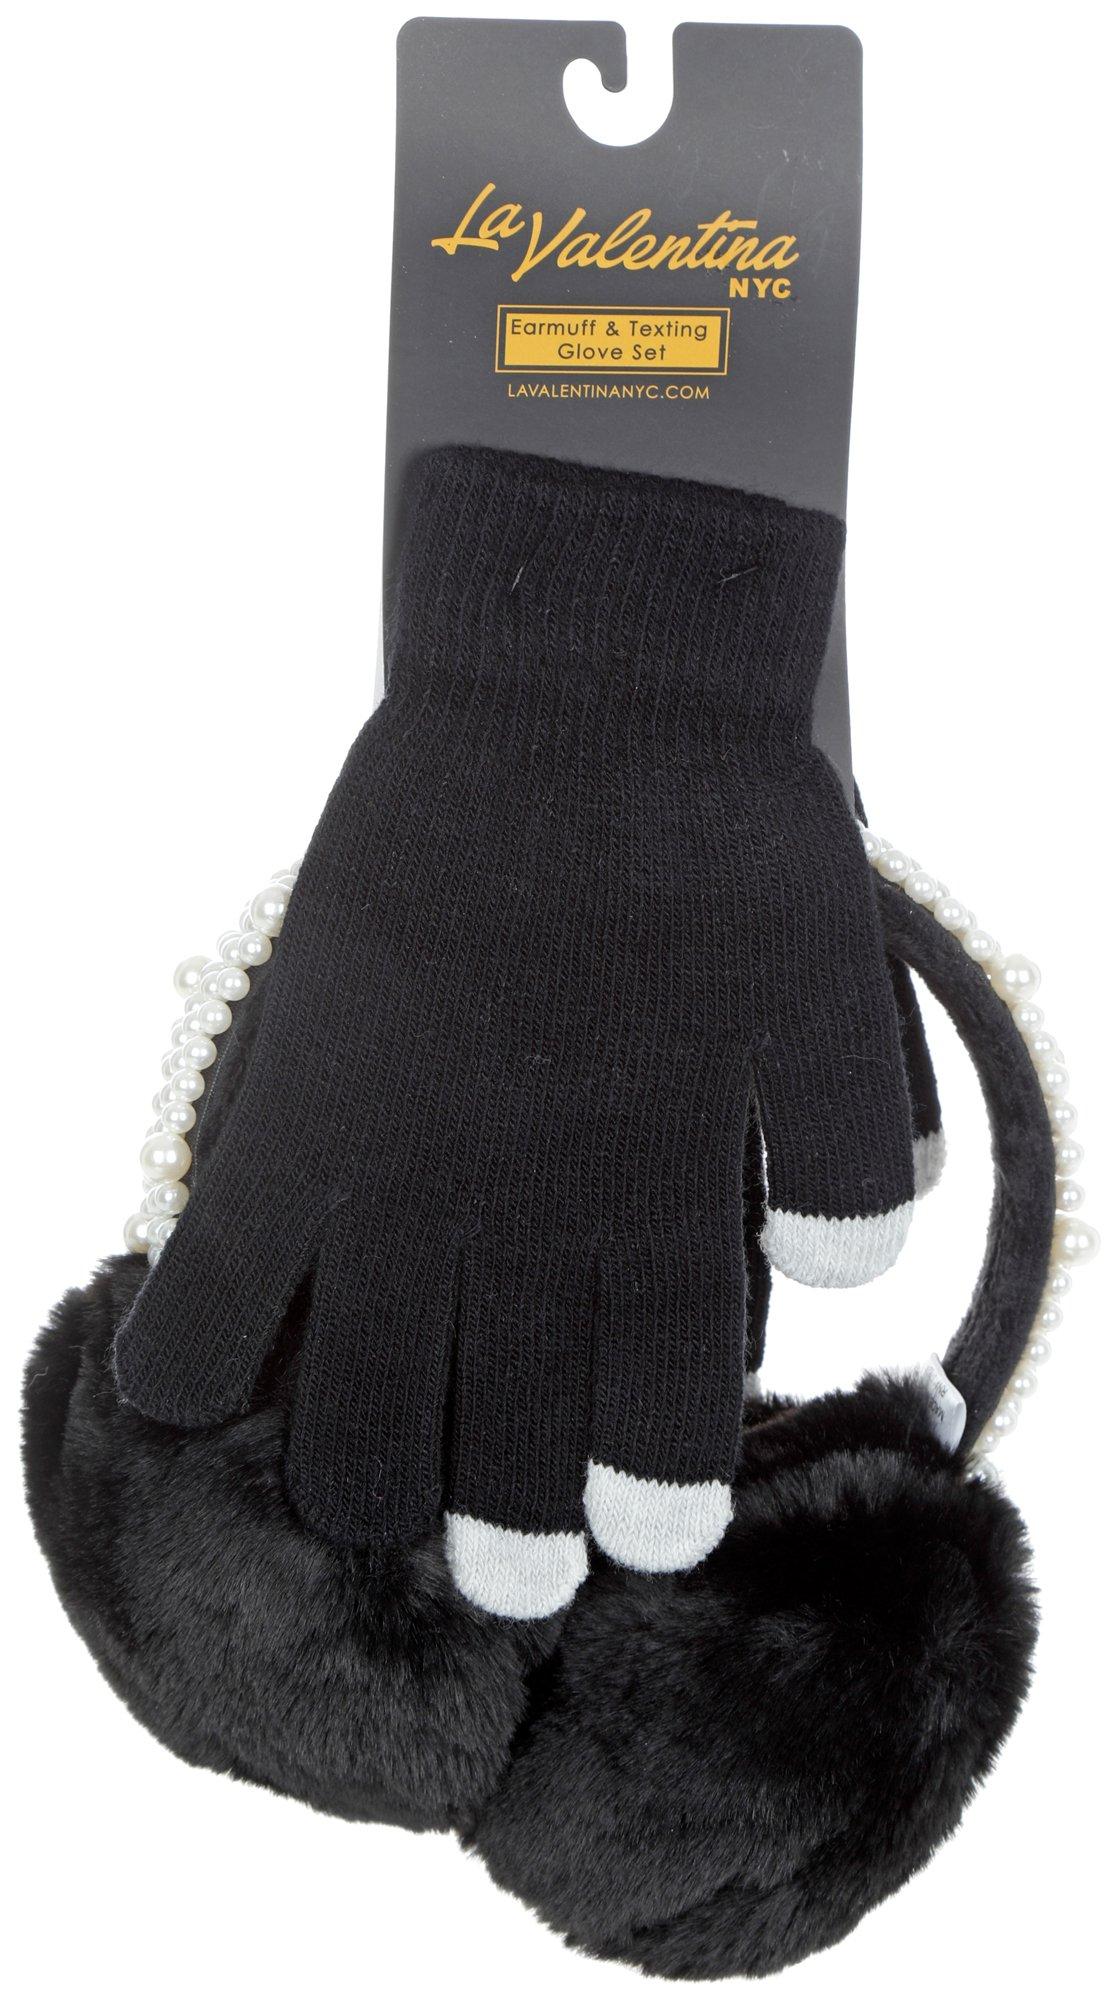 2 Pc Faux Fur Ear Muffs and Gloves Set